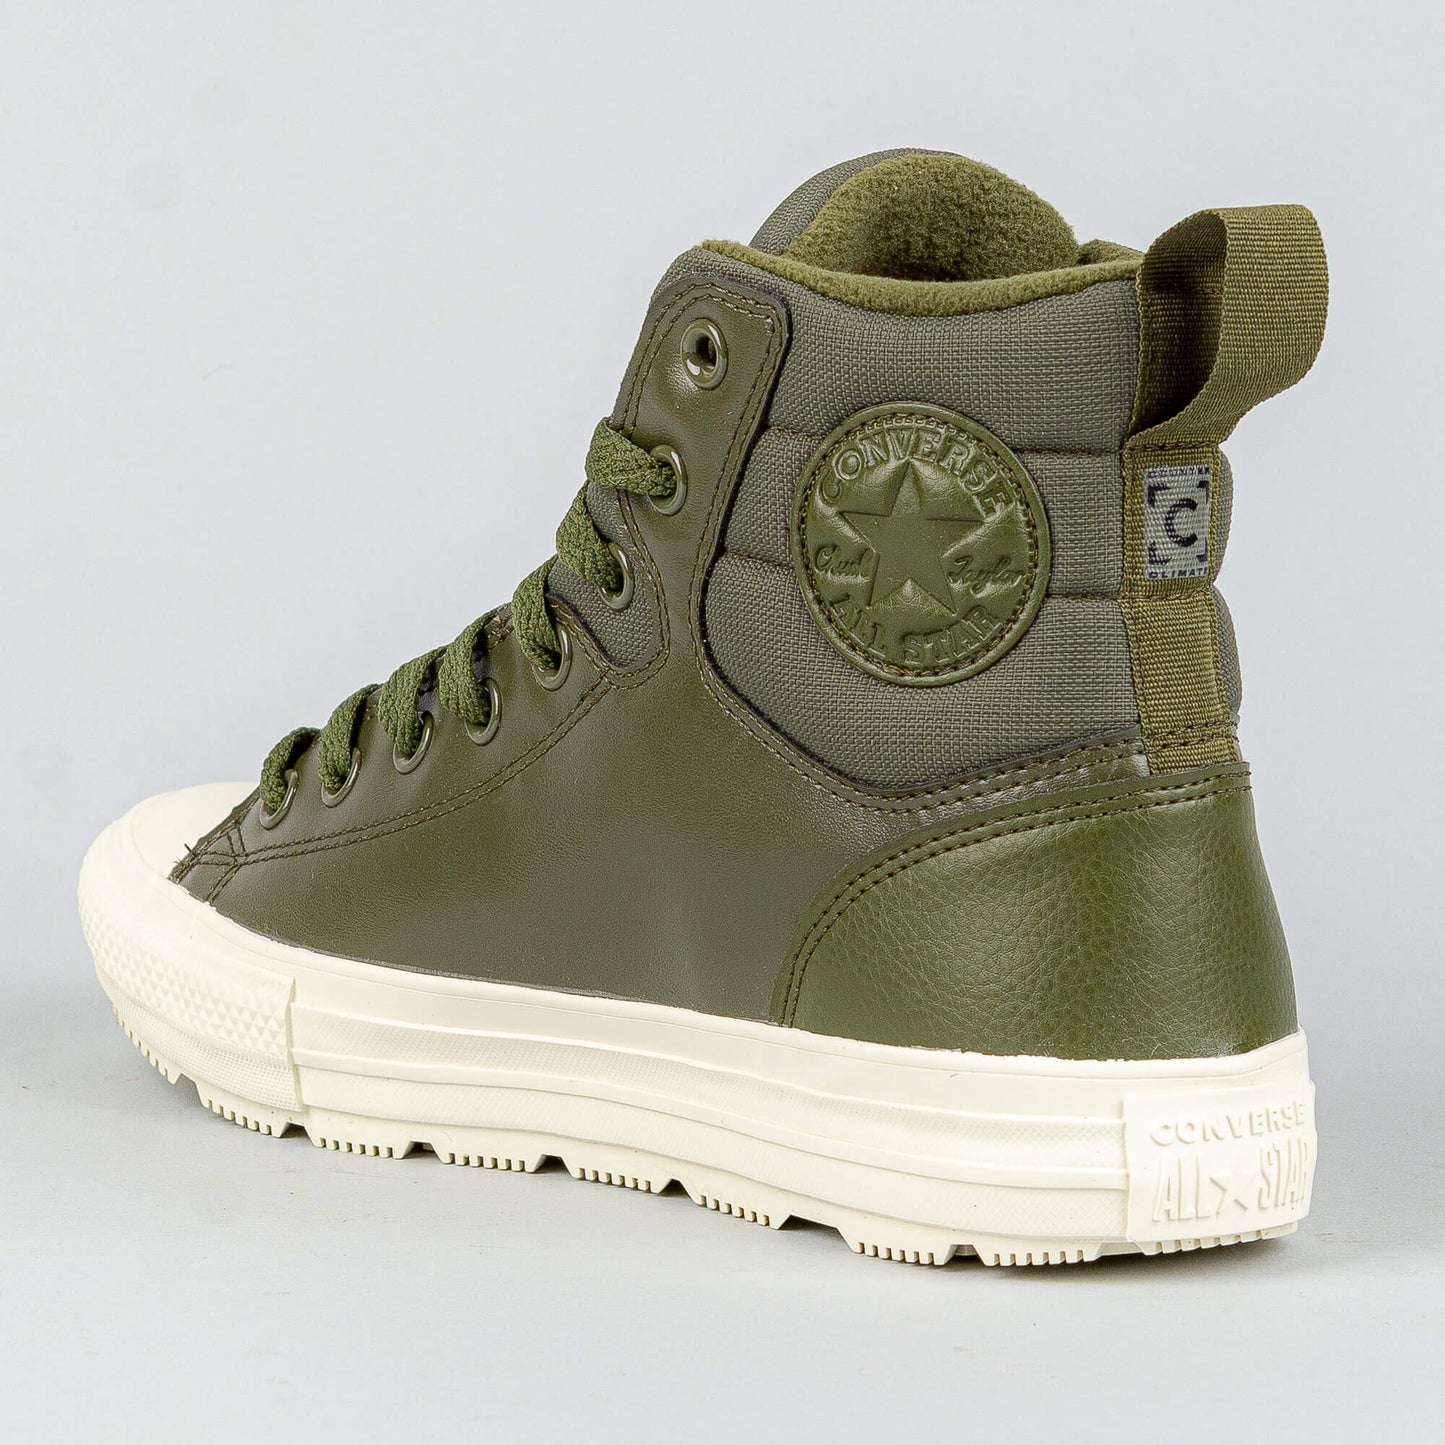 CONVERSE Chuck Taylor All Star Berkshire Boot Olive